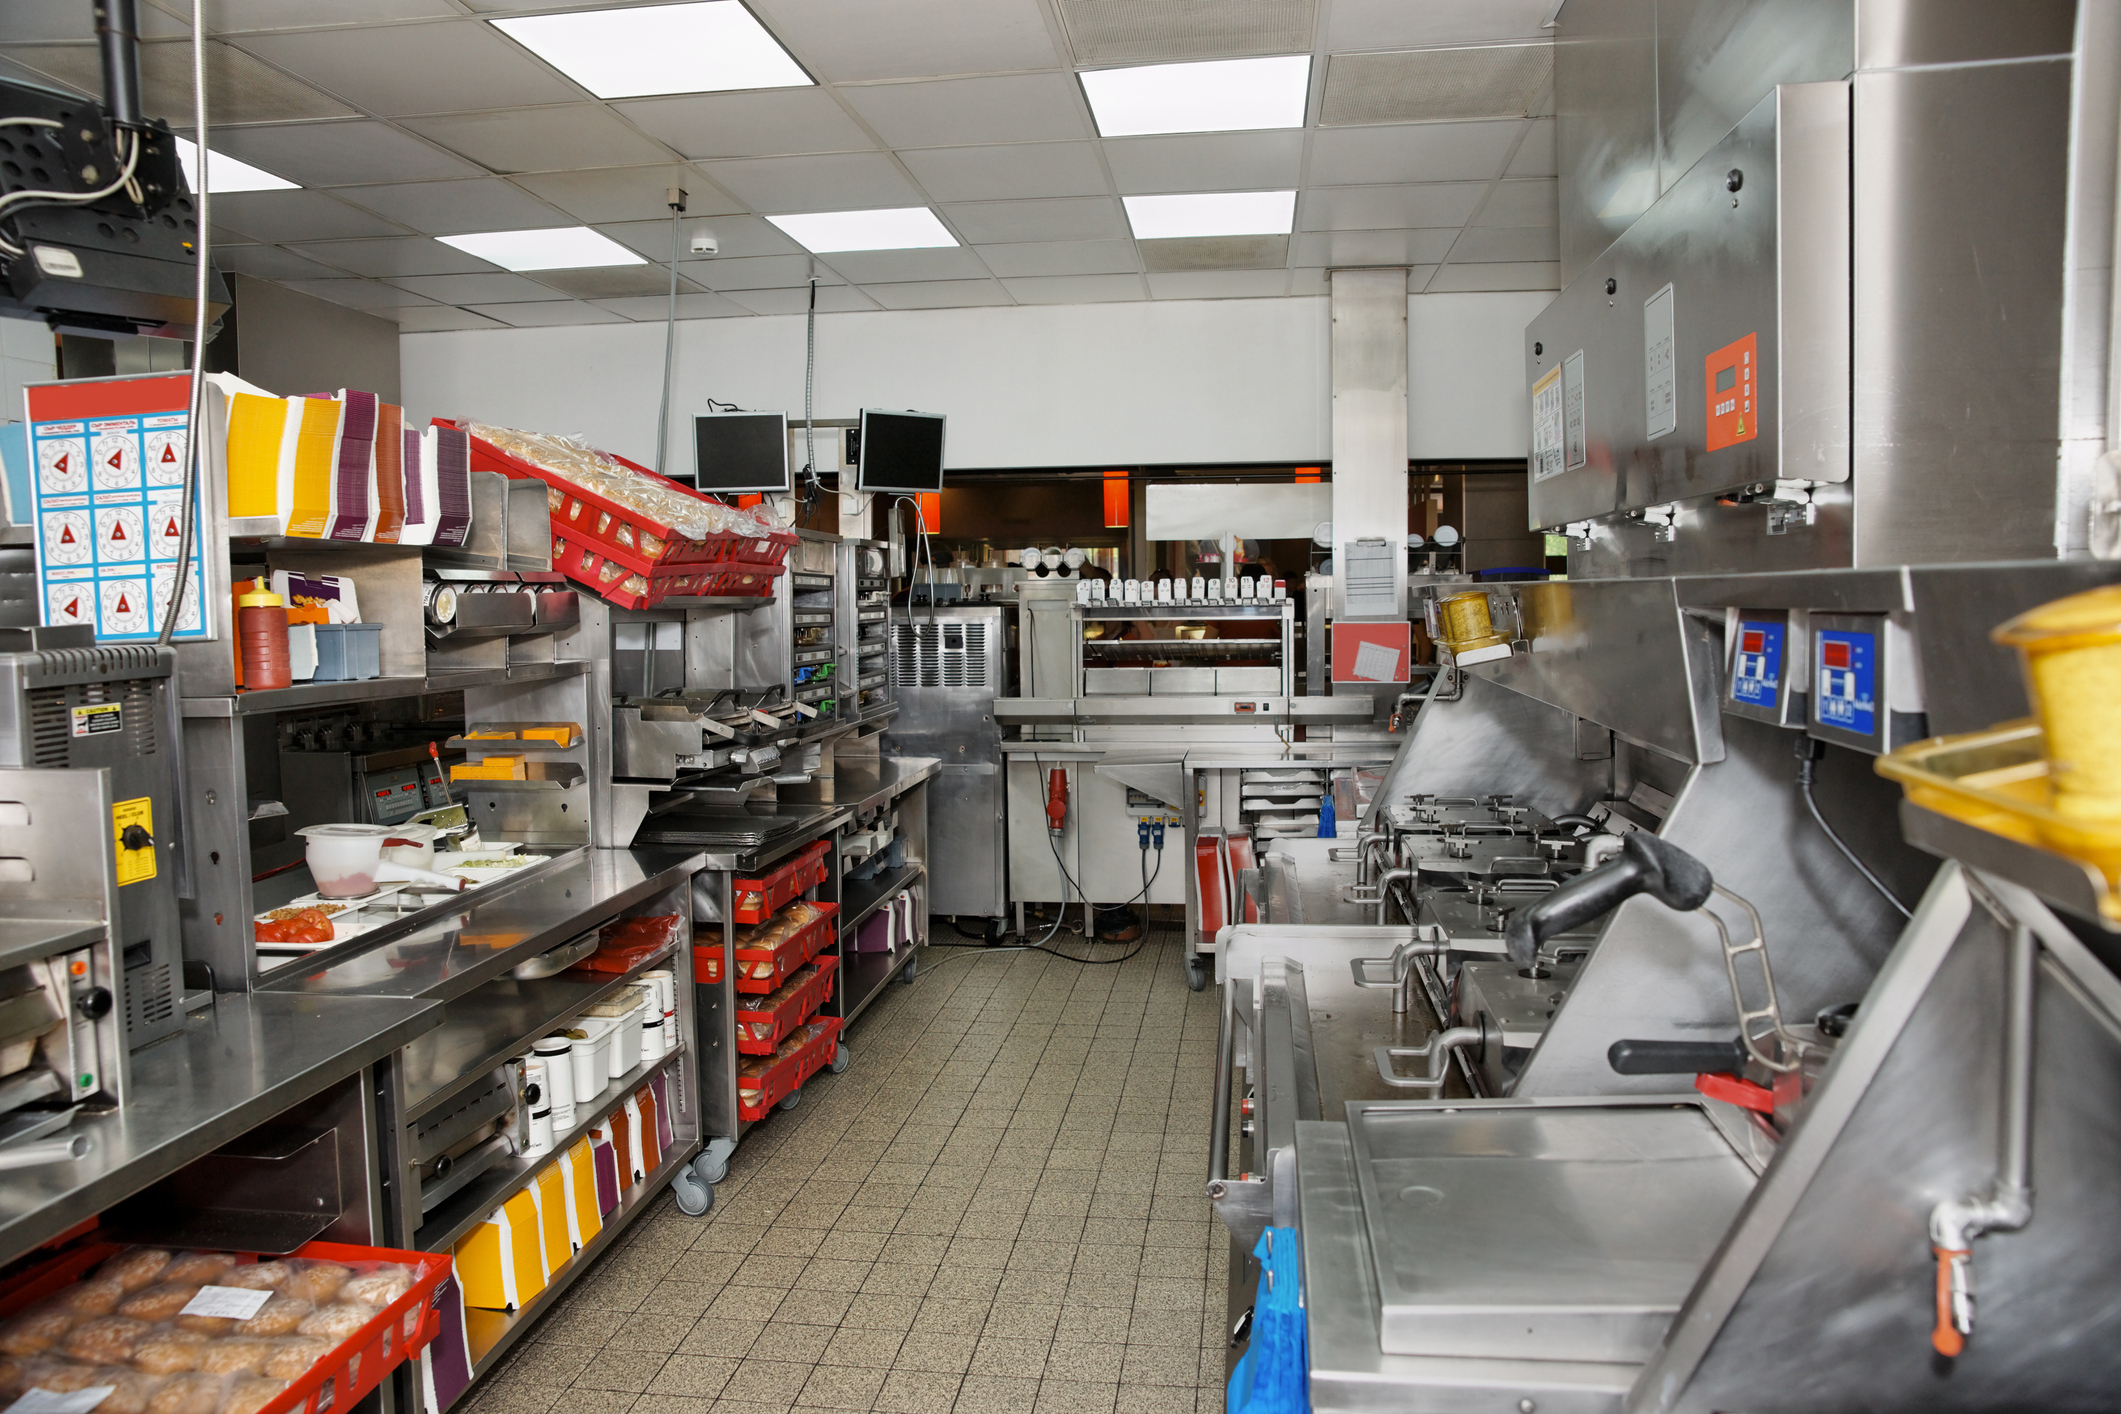 Fast food restaurant with equipment ready to auction